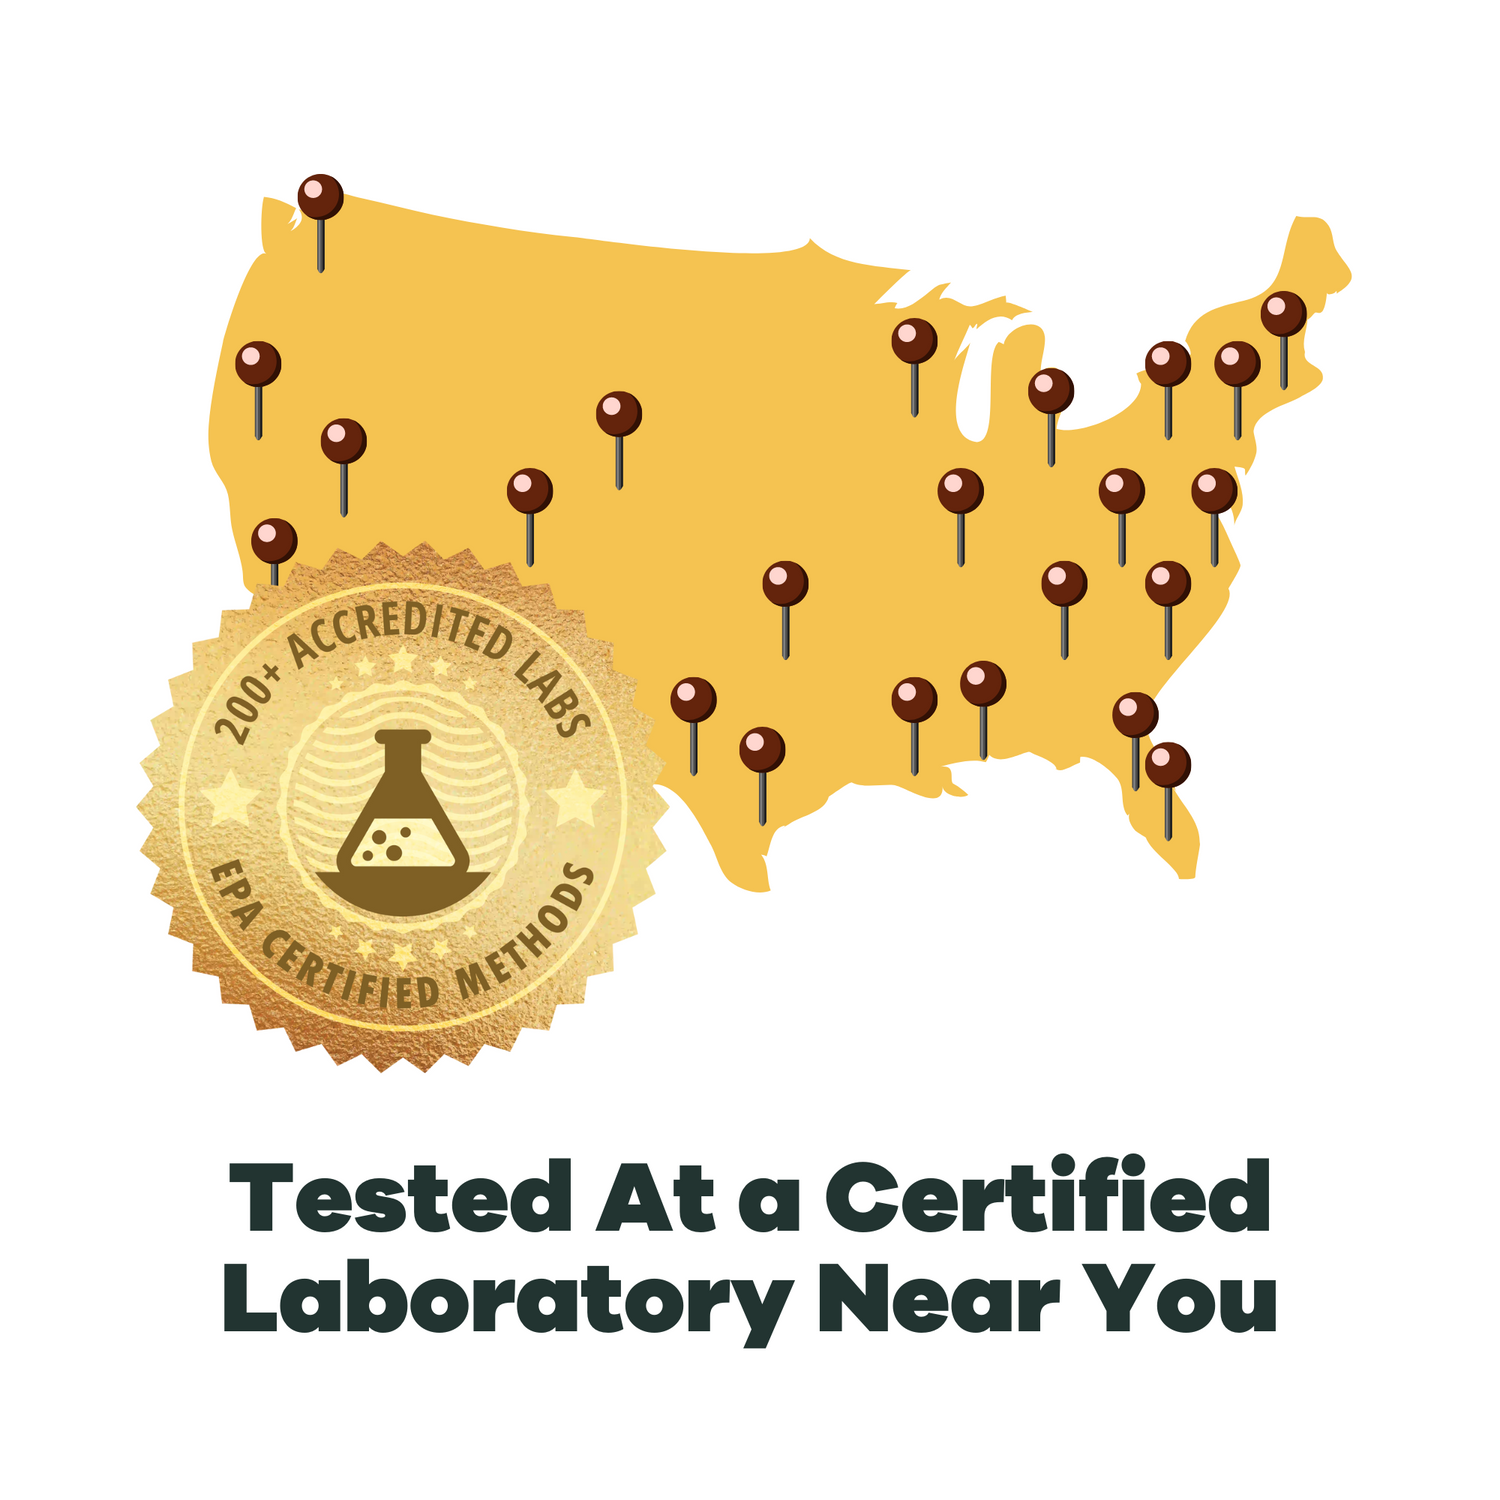 Tested at a lab near you